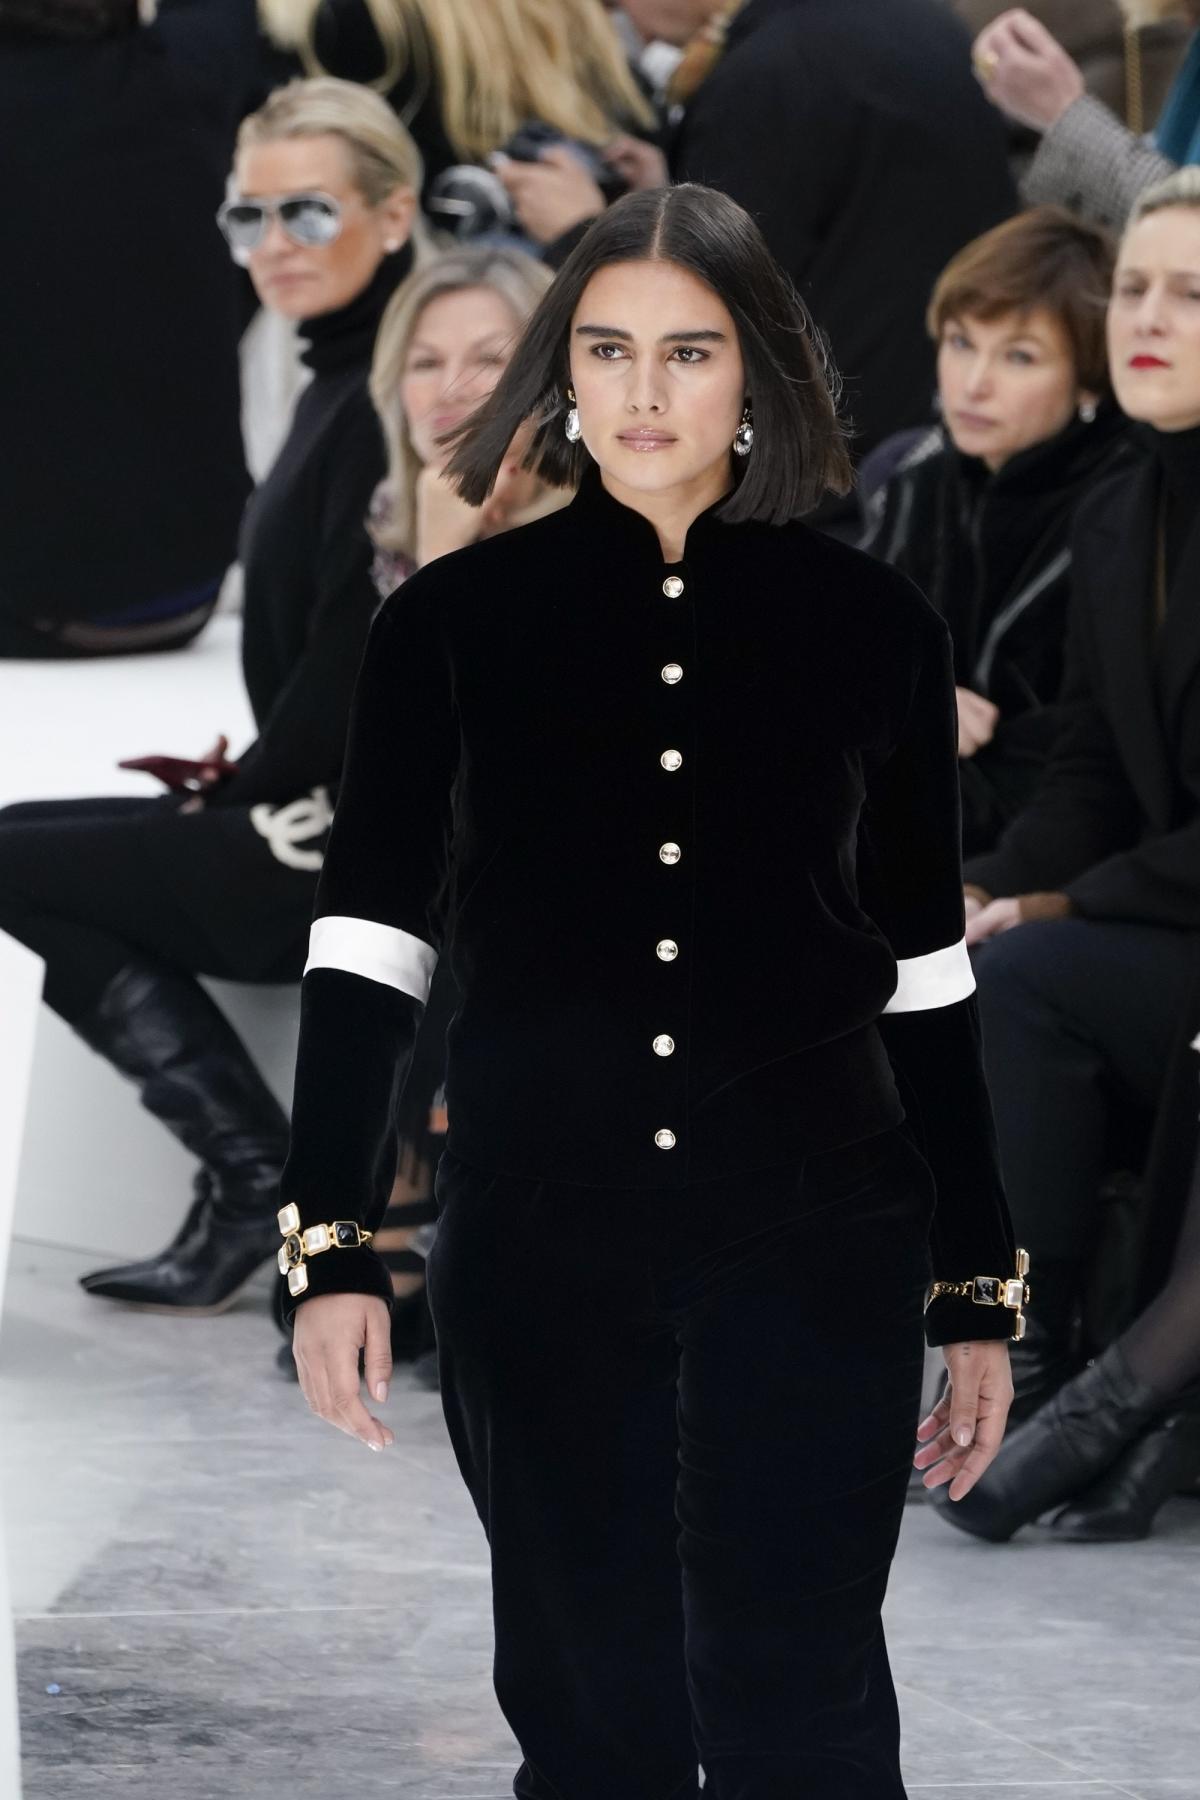 Chanel's Runway Featured A Plus-Size Model For The First Time In 10 Years